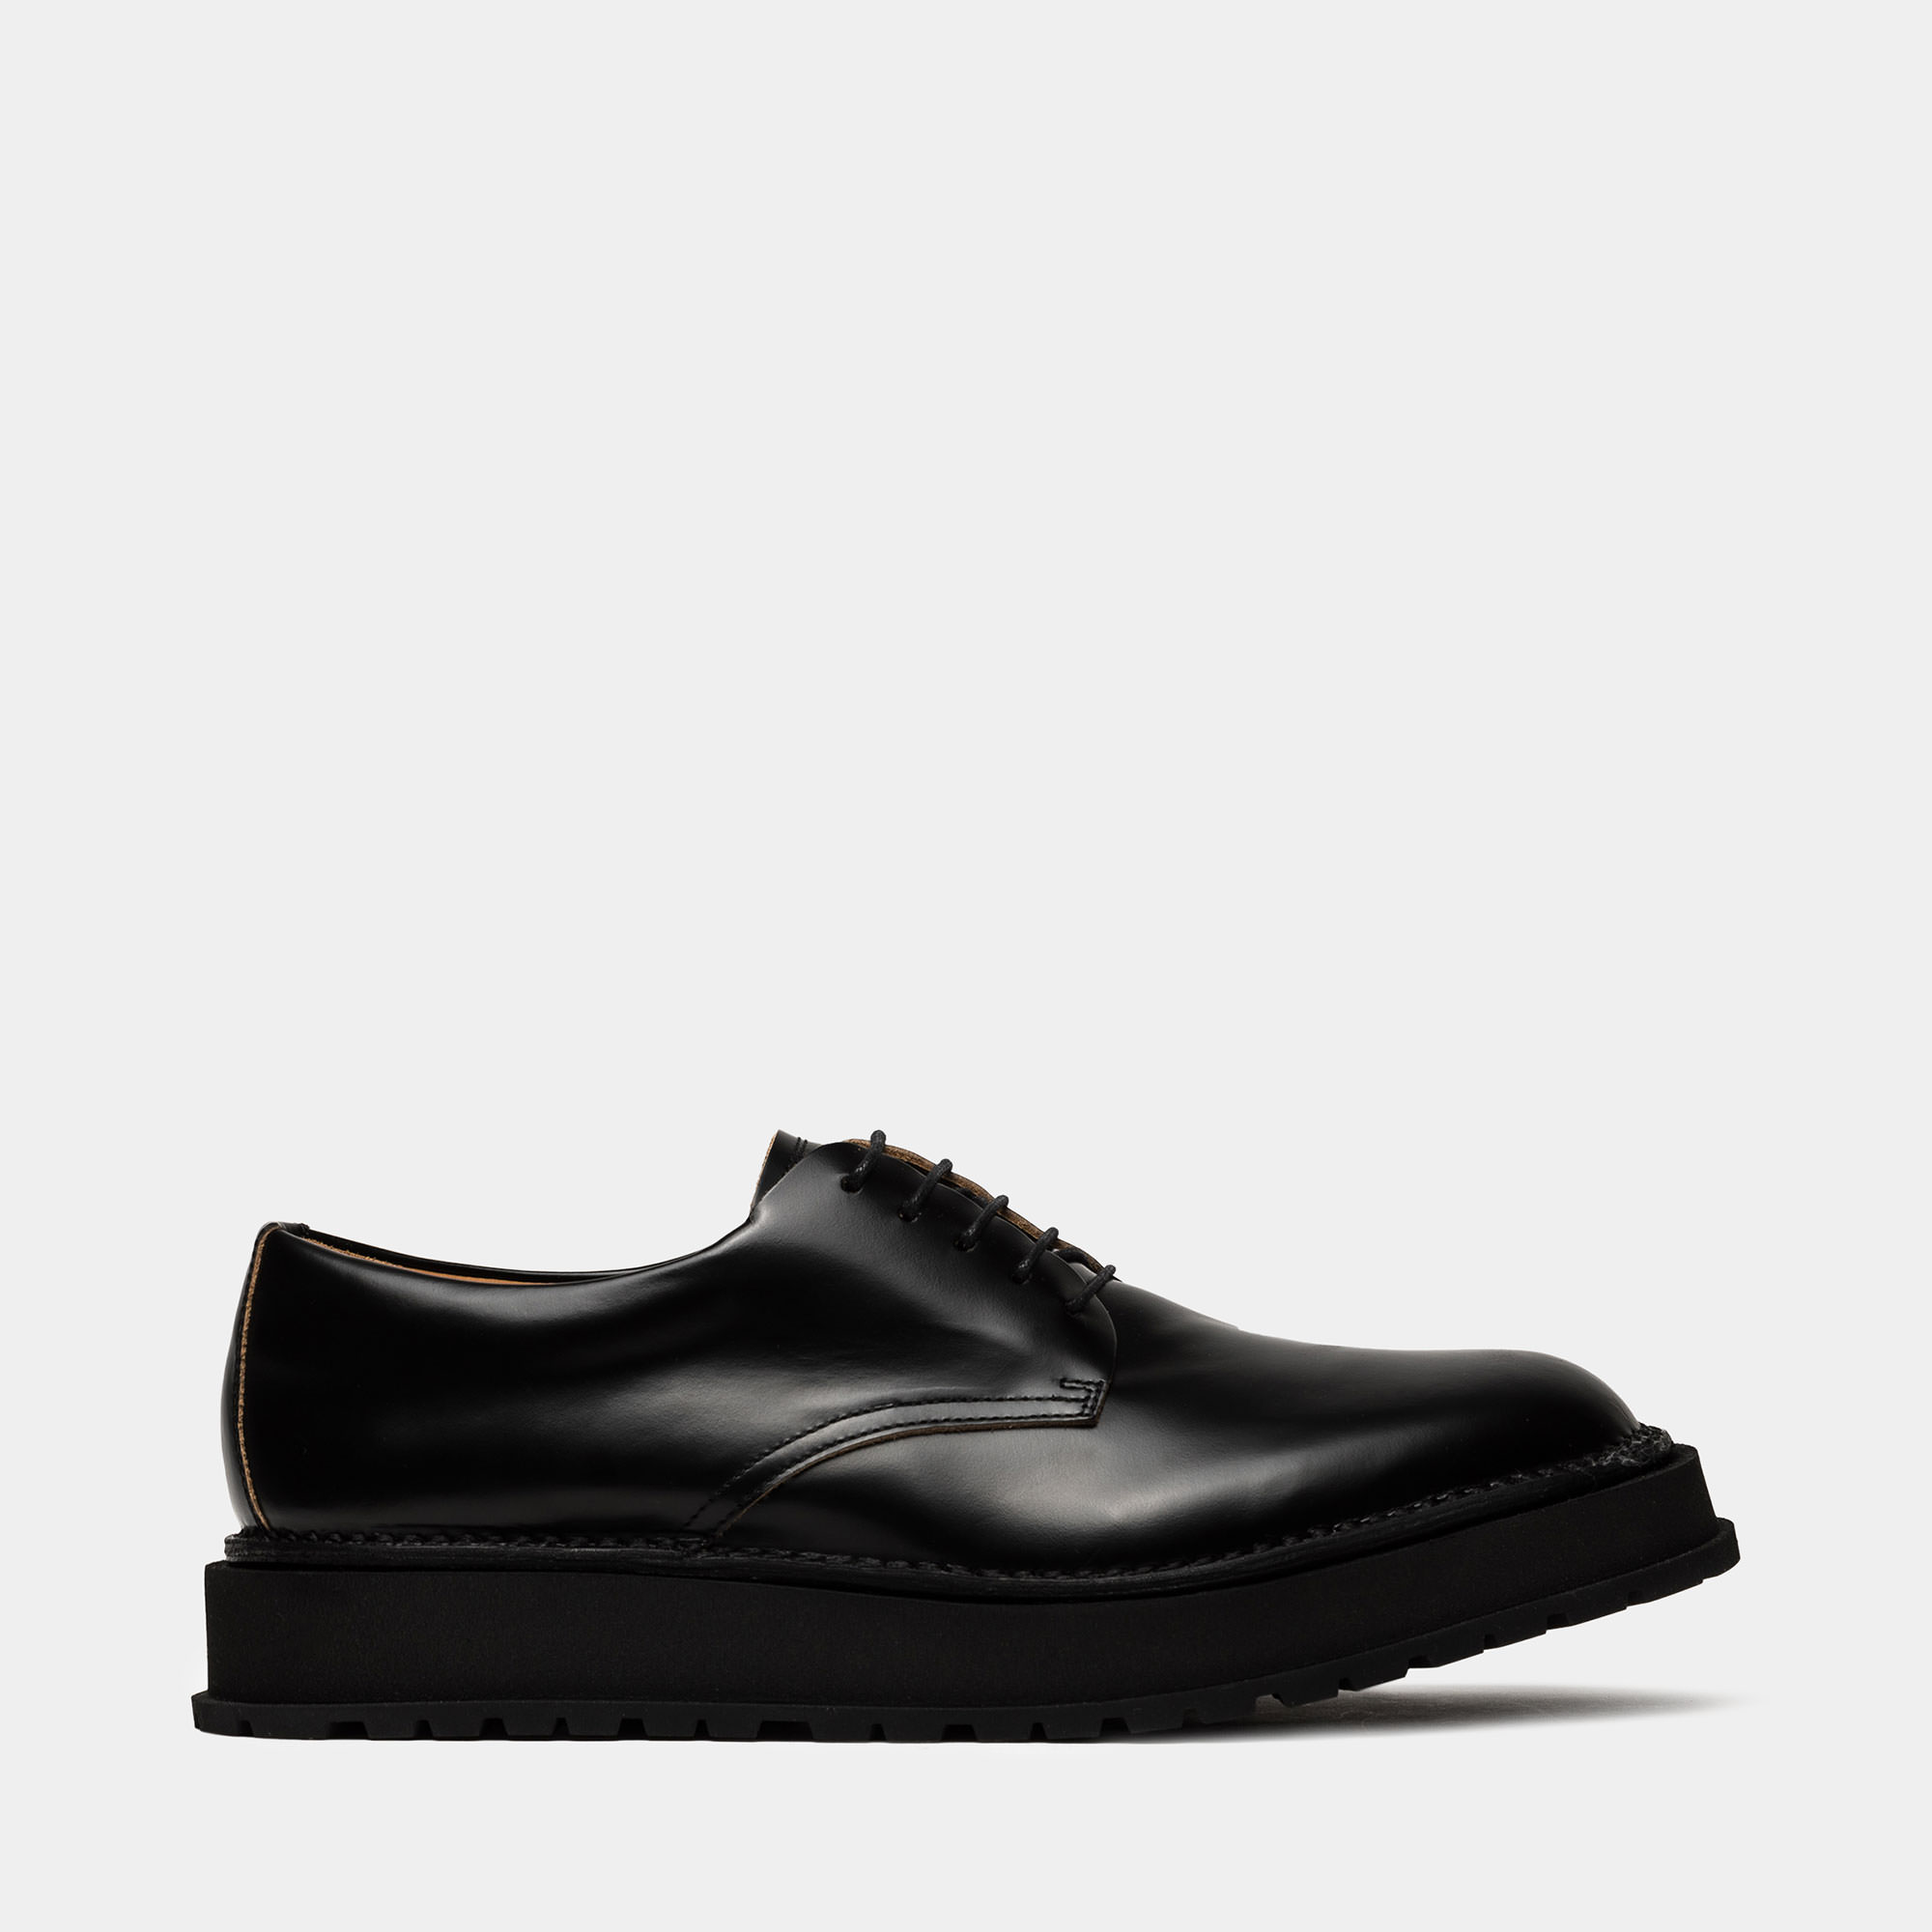 BUTTERO AEDI DERBY SHOES IN BLACK BRUSHED LEATHER B10080ELBFA-UG1/01-NERO